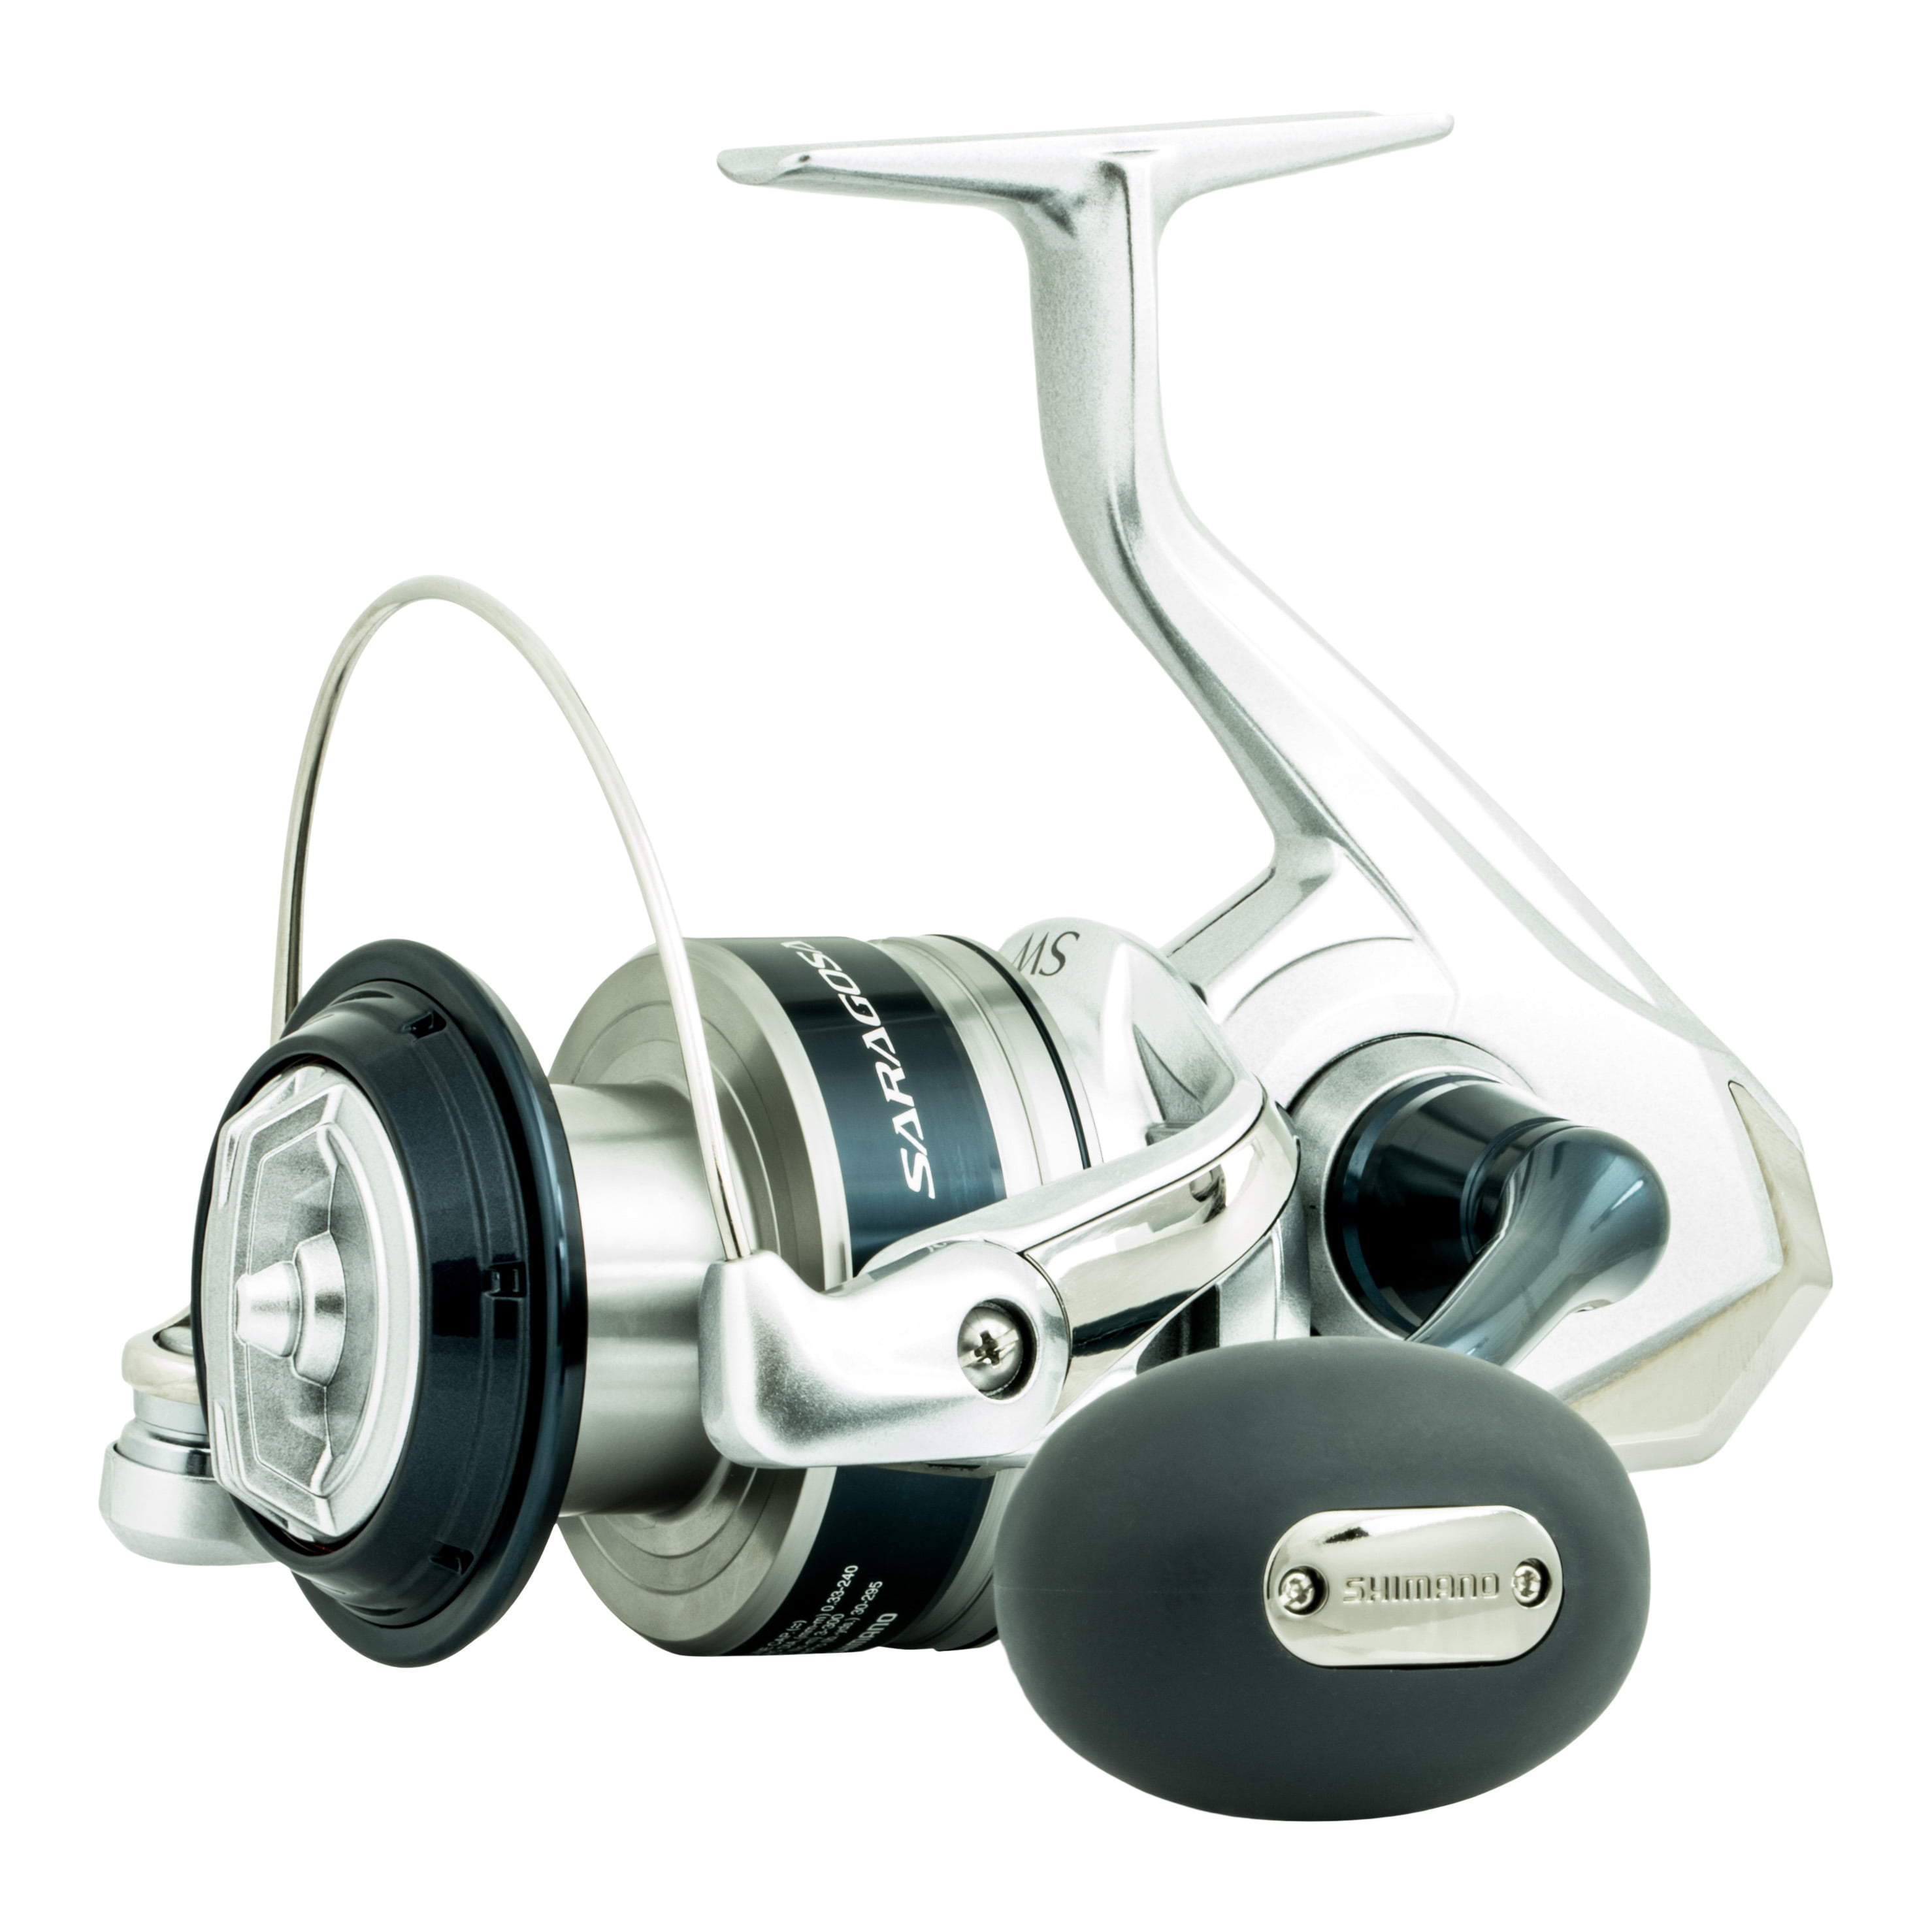 NEW Shimano Saragosa A SW 8000HG Saltwater Spinning Reel SRG8000SWAHG 5.6:1 